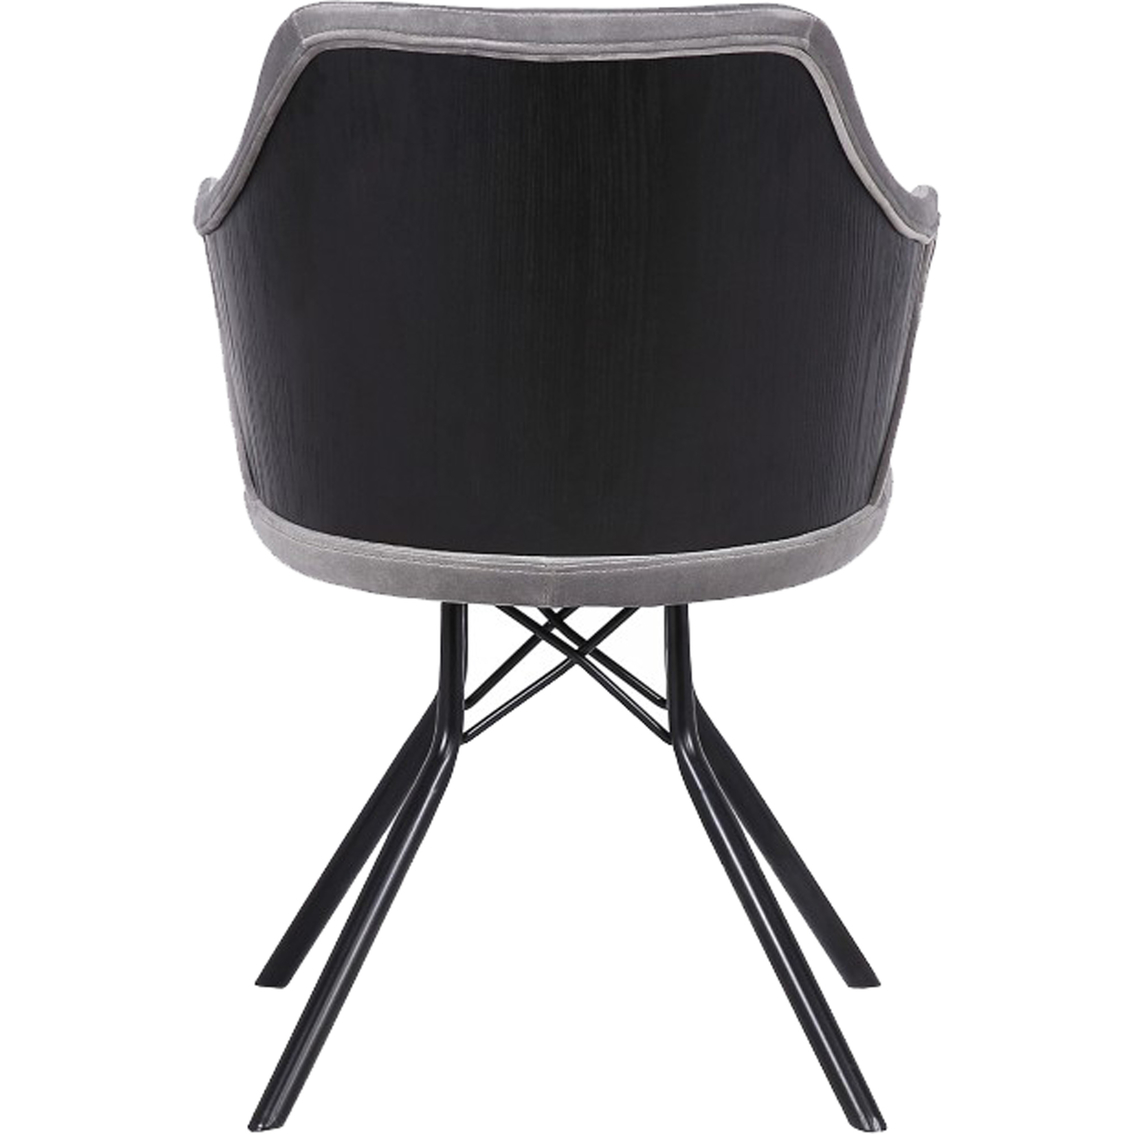 Armen Living Eagle Barstool in Black Coated Finish with Black Faux Leather - Image 3 of 6